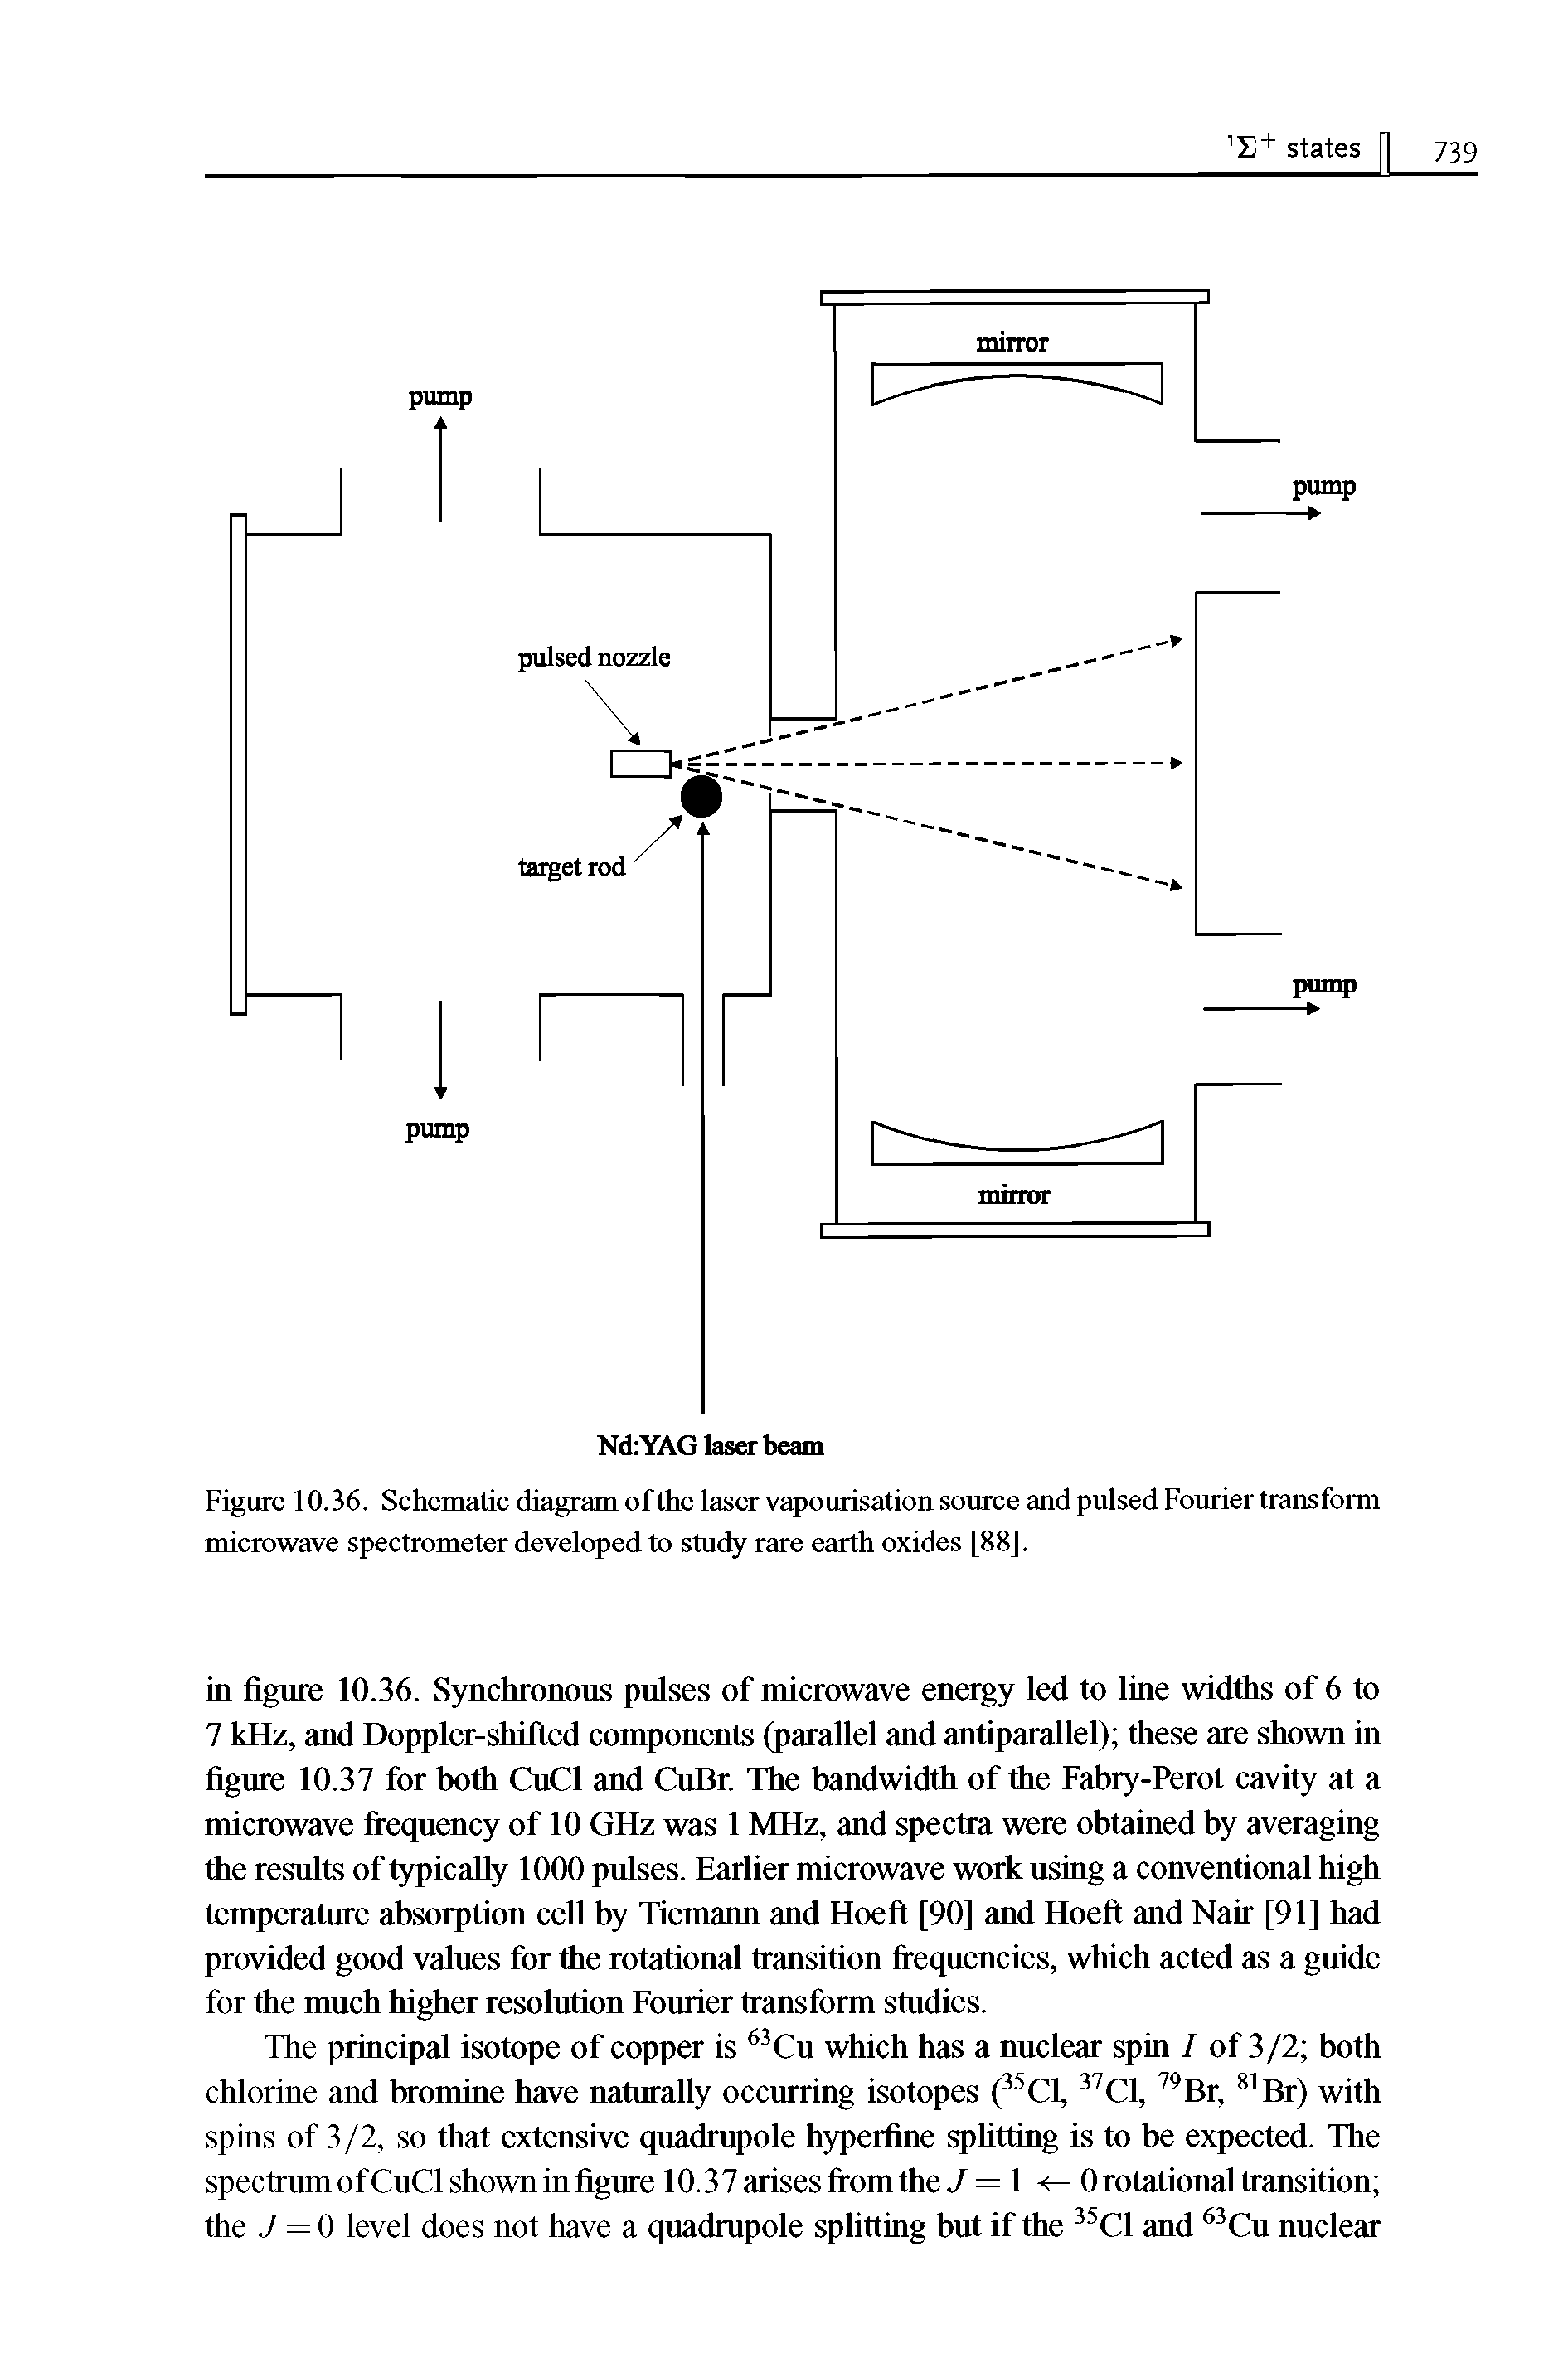 Figure 10.36. Schematic diagram of the laser vapourisation source and pulsed Fourier transform microwave spectrometer developed to study rare earth oxides [88].